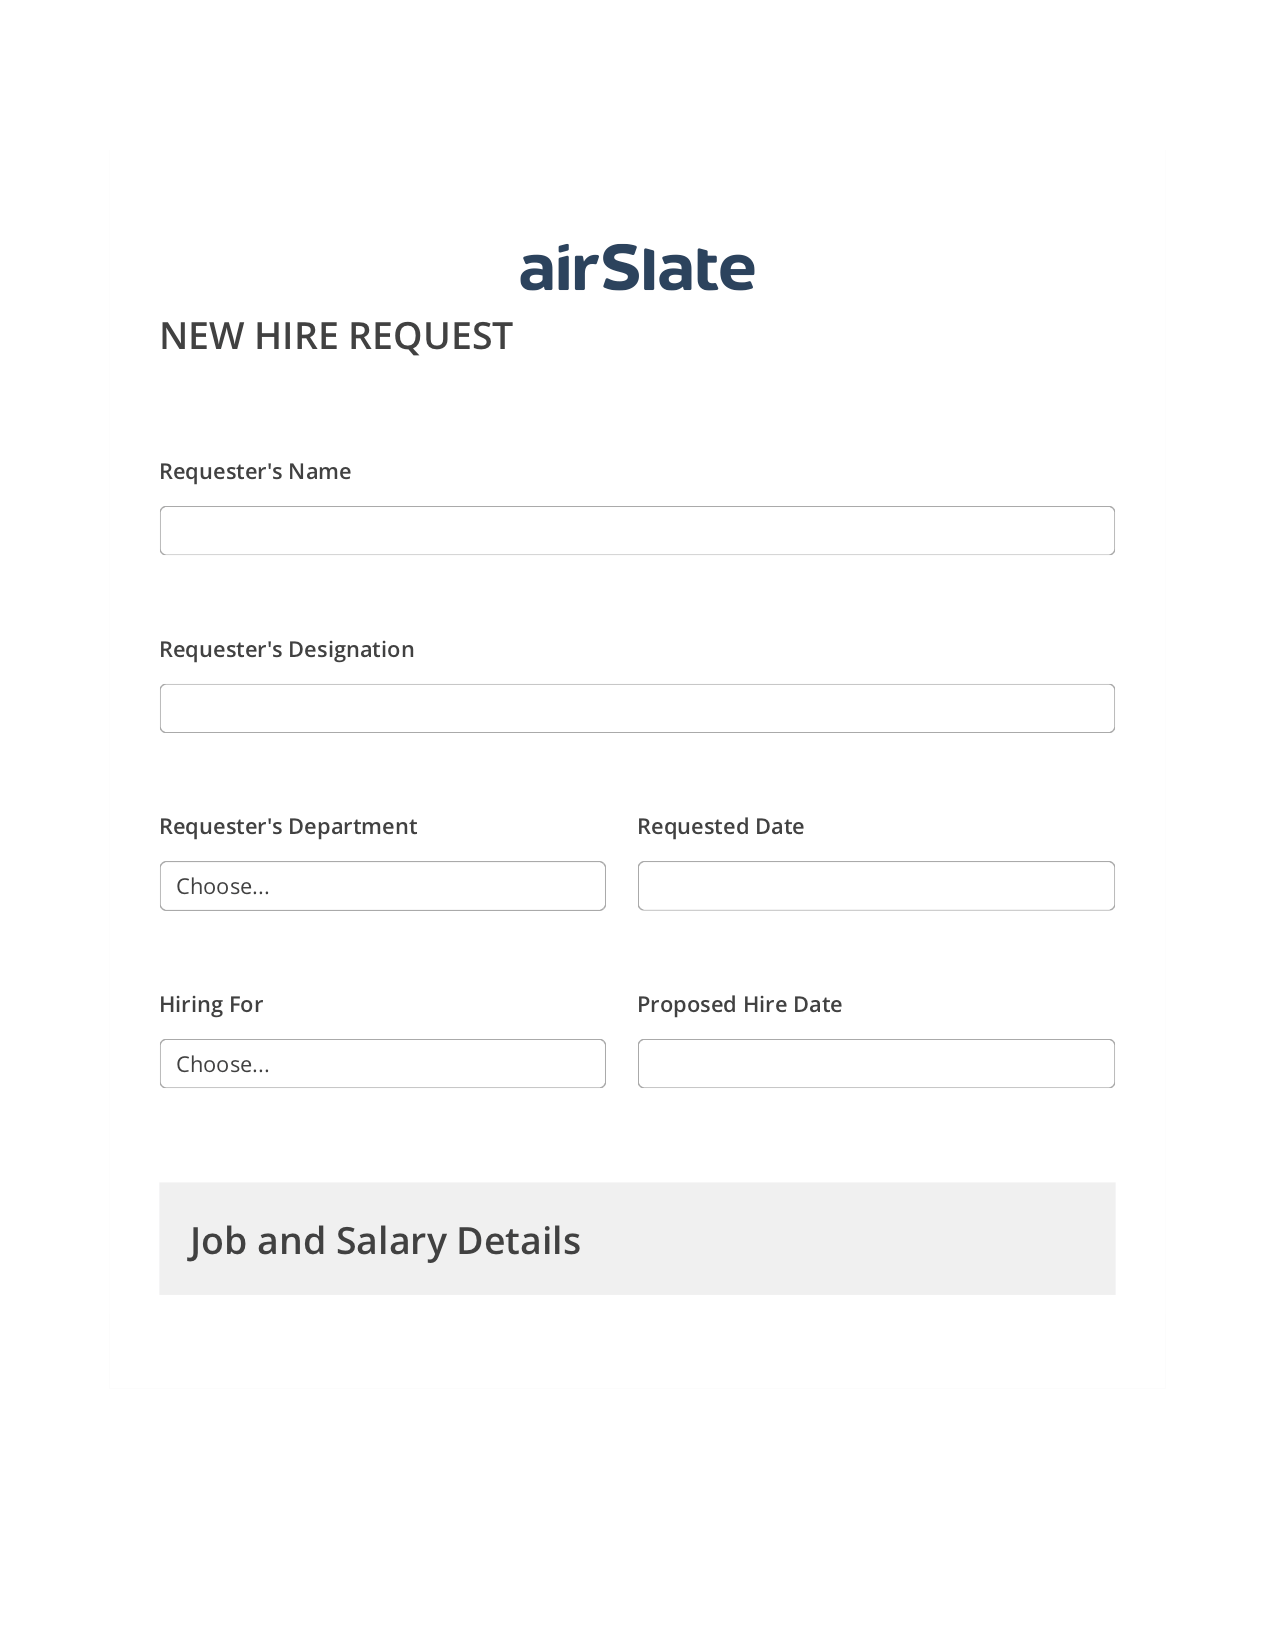 Multirole Hiring Request Workflow Pre-fill from AirTable Bot, Export to MS Dynamics 365 Bot, Export to Smartsheet